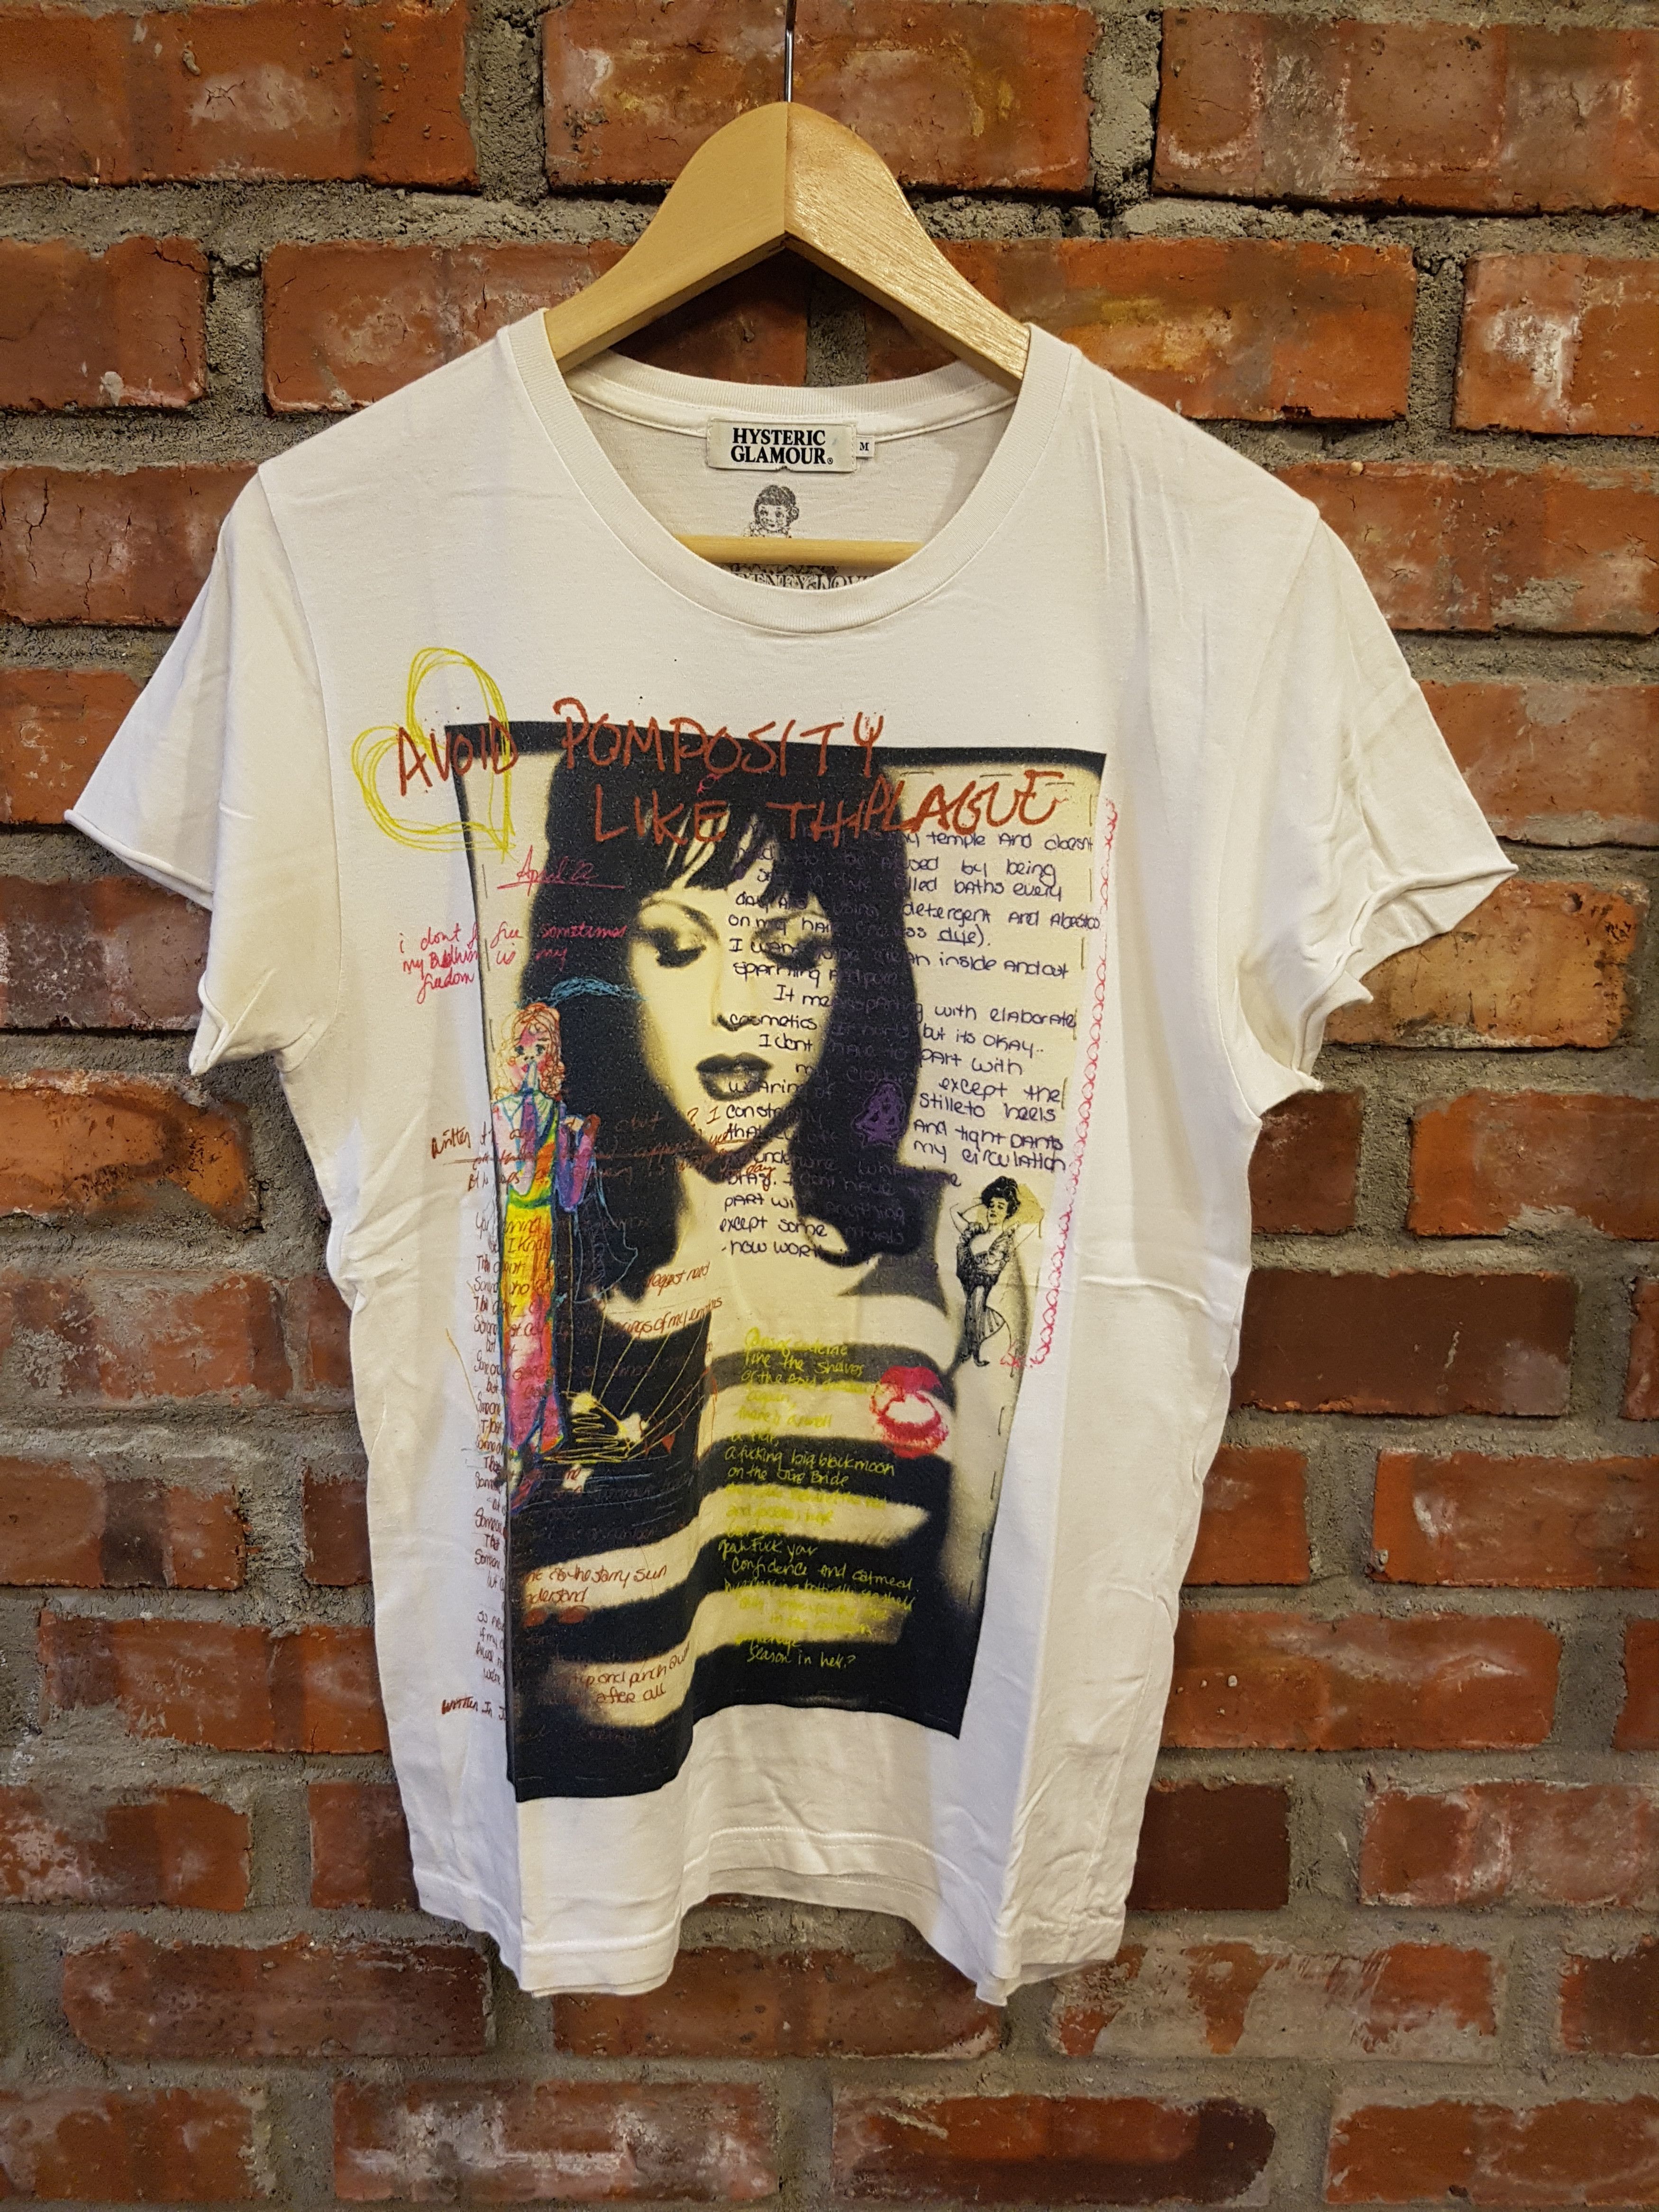 Hysteric Glamour Hysteric Glamour x Courtney Love | Grailed